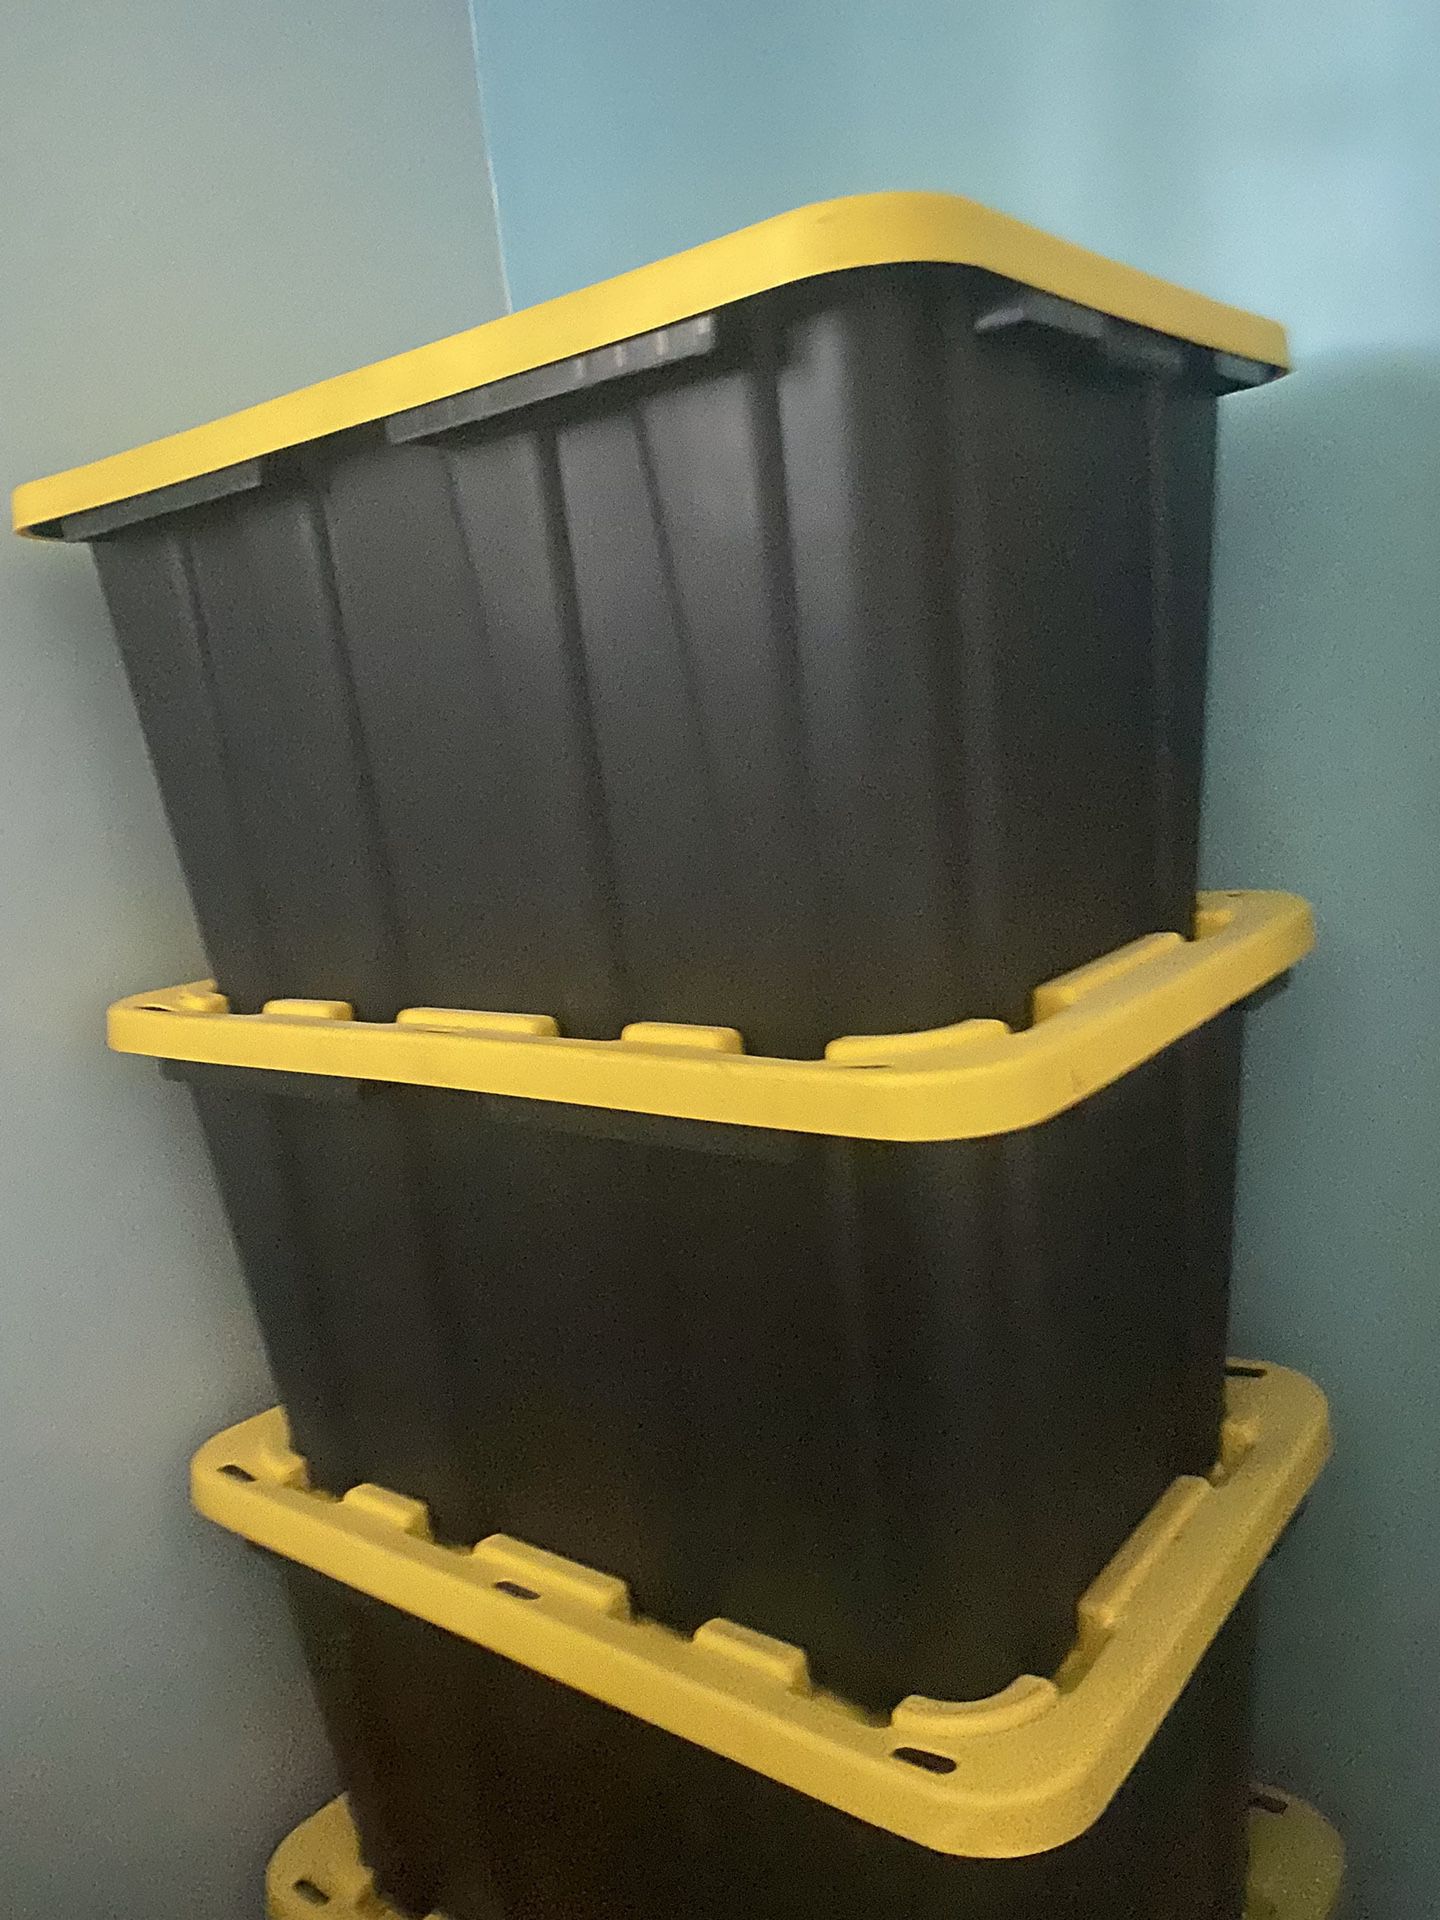 15 Brand New, Super Heavy Duty 27 Gallons Capacity Stackable Storage Containers, Available Today Asking $15. Each If Purchasing 5 Or More…